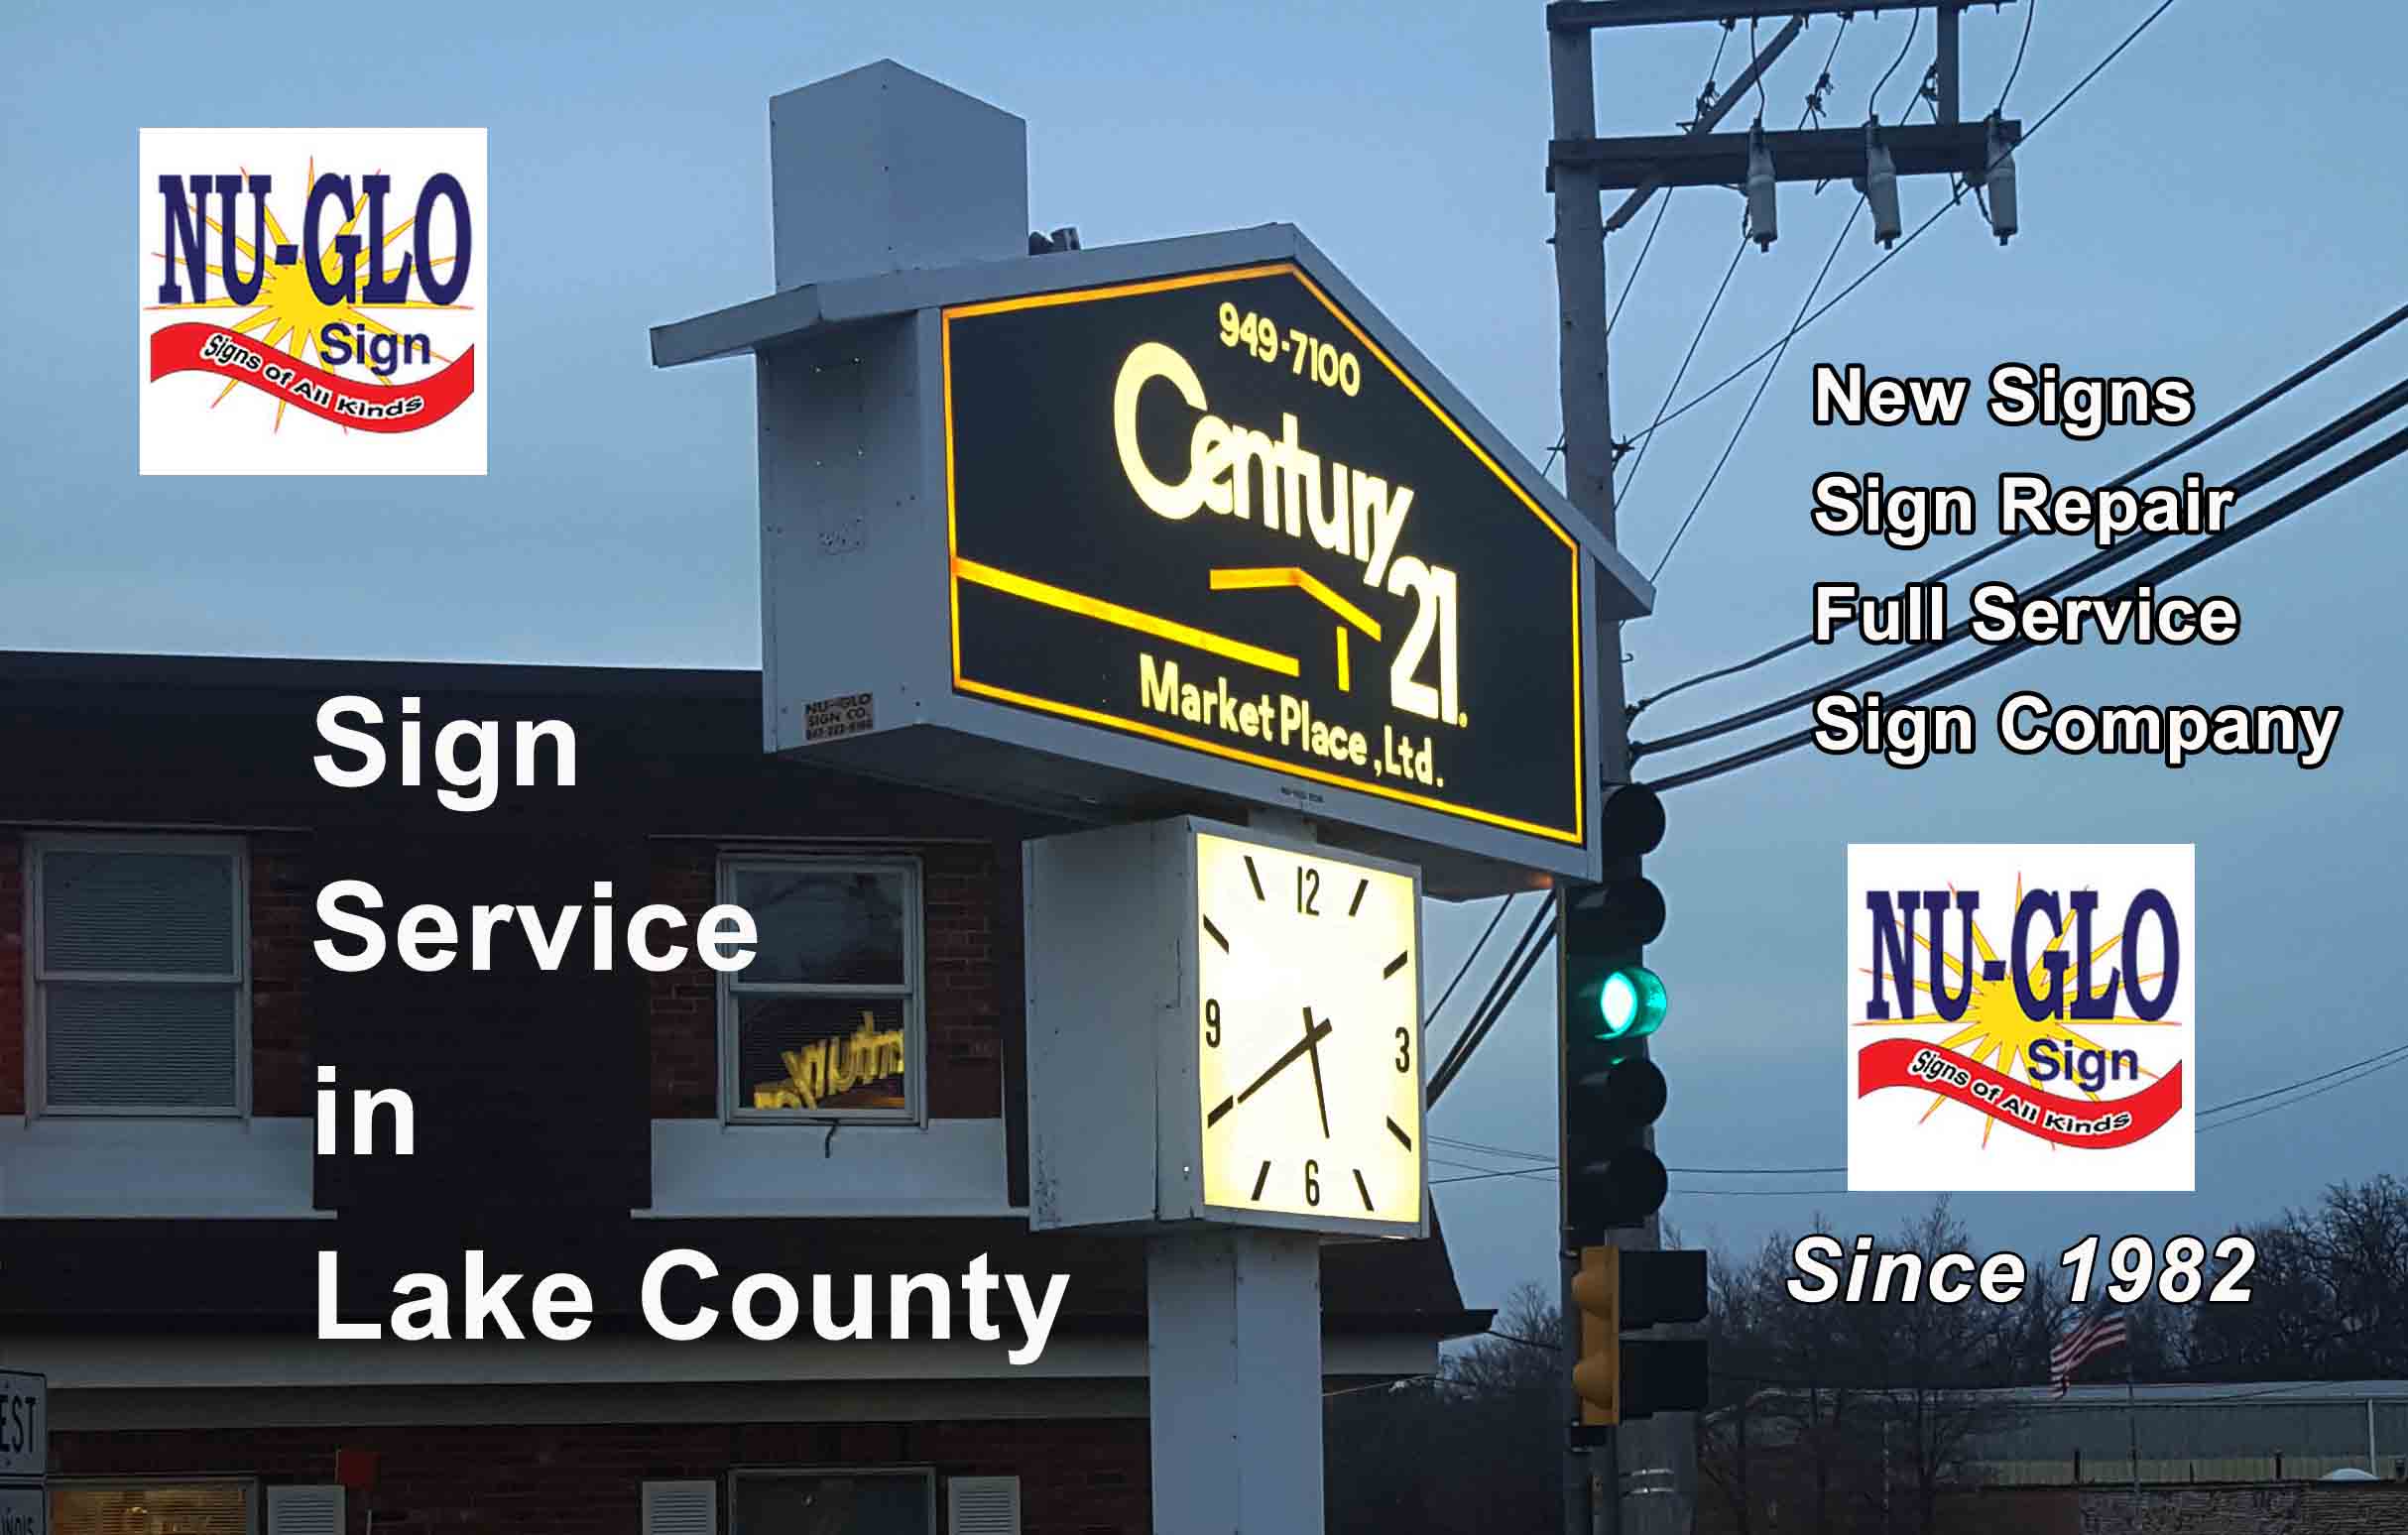 Sign Company in Lake County Illinois